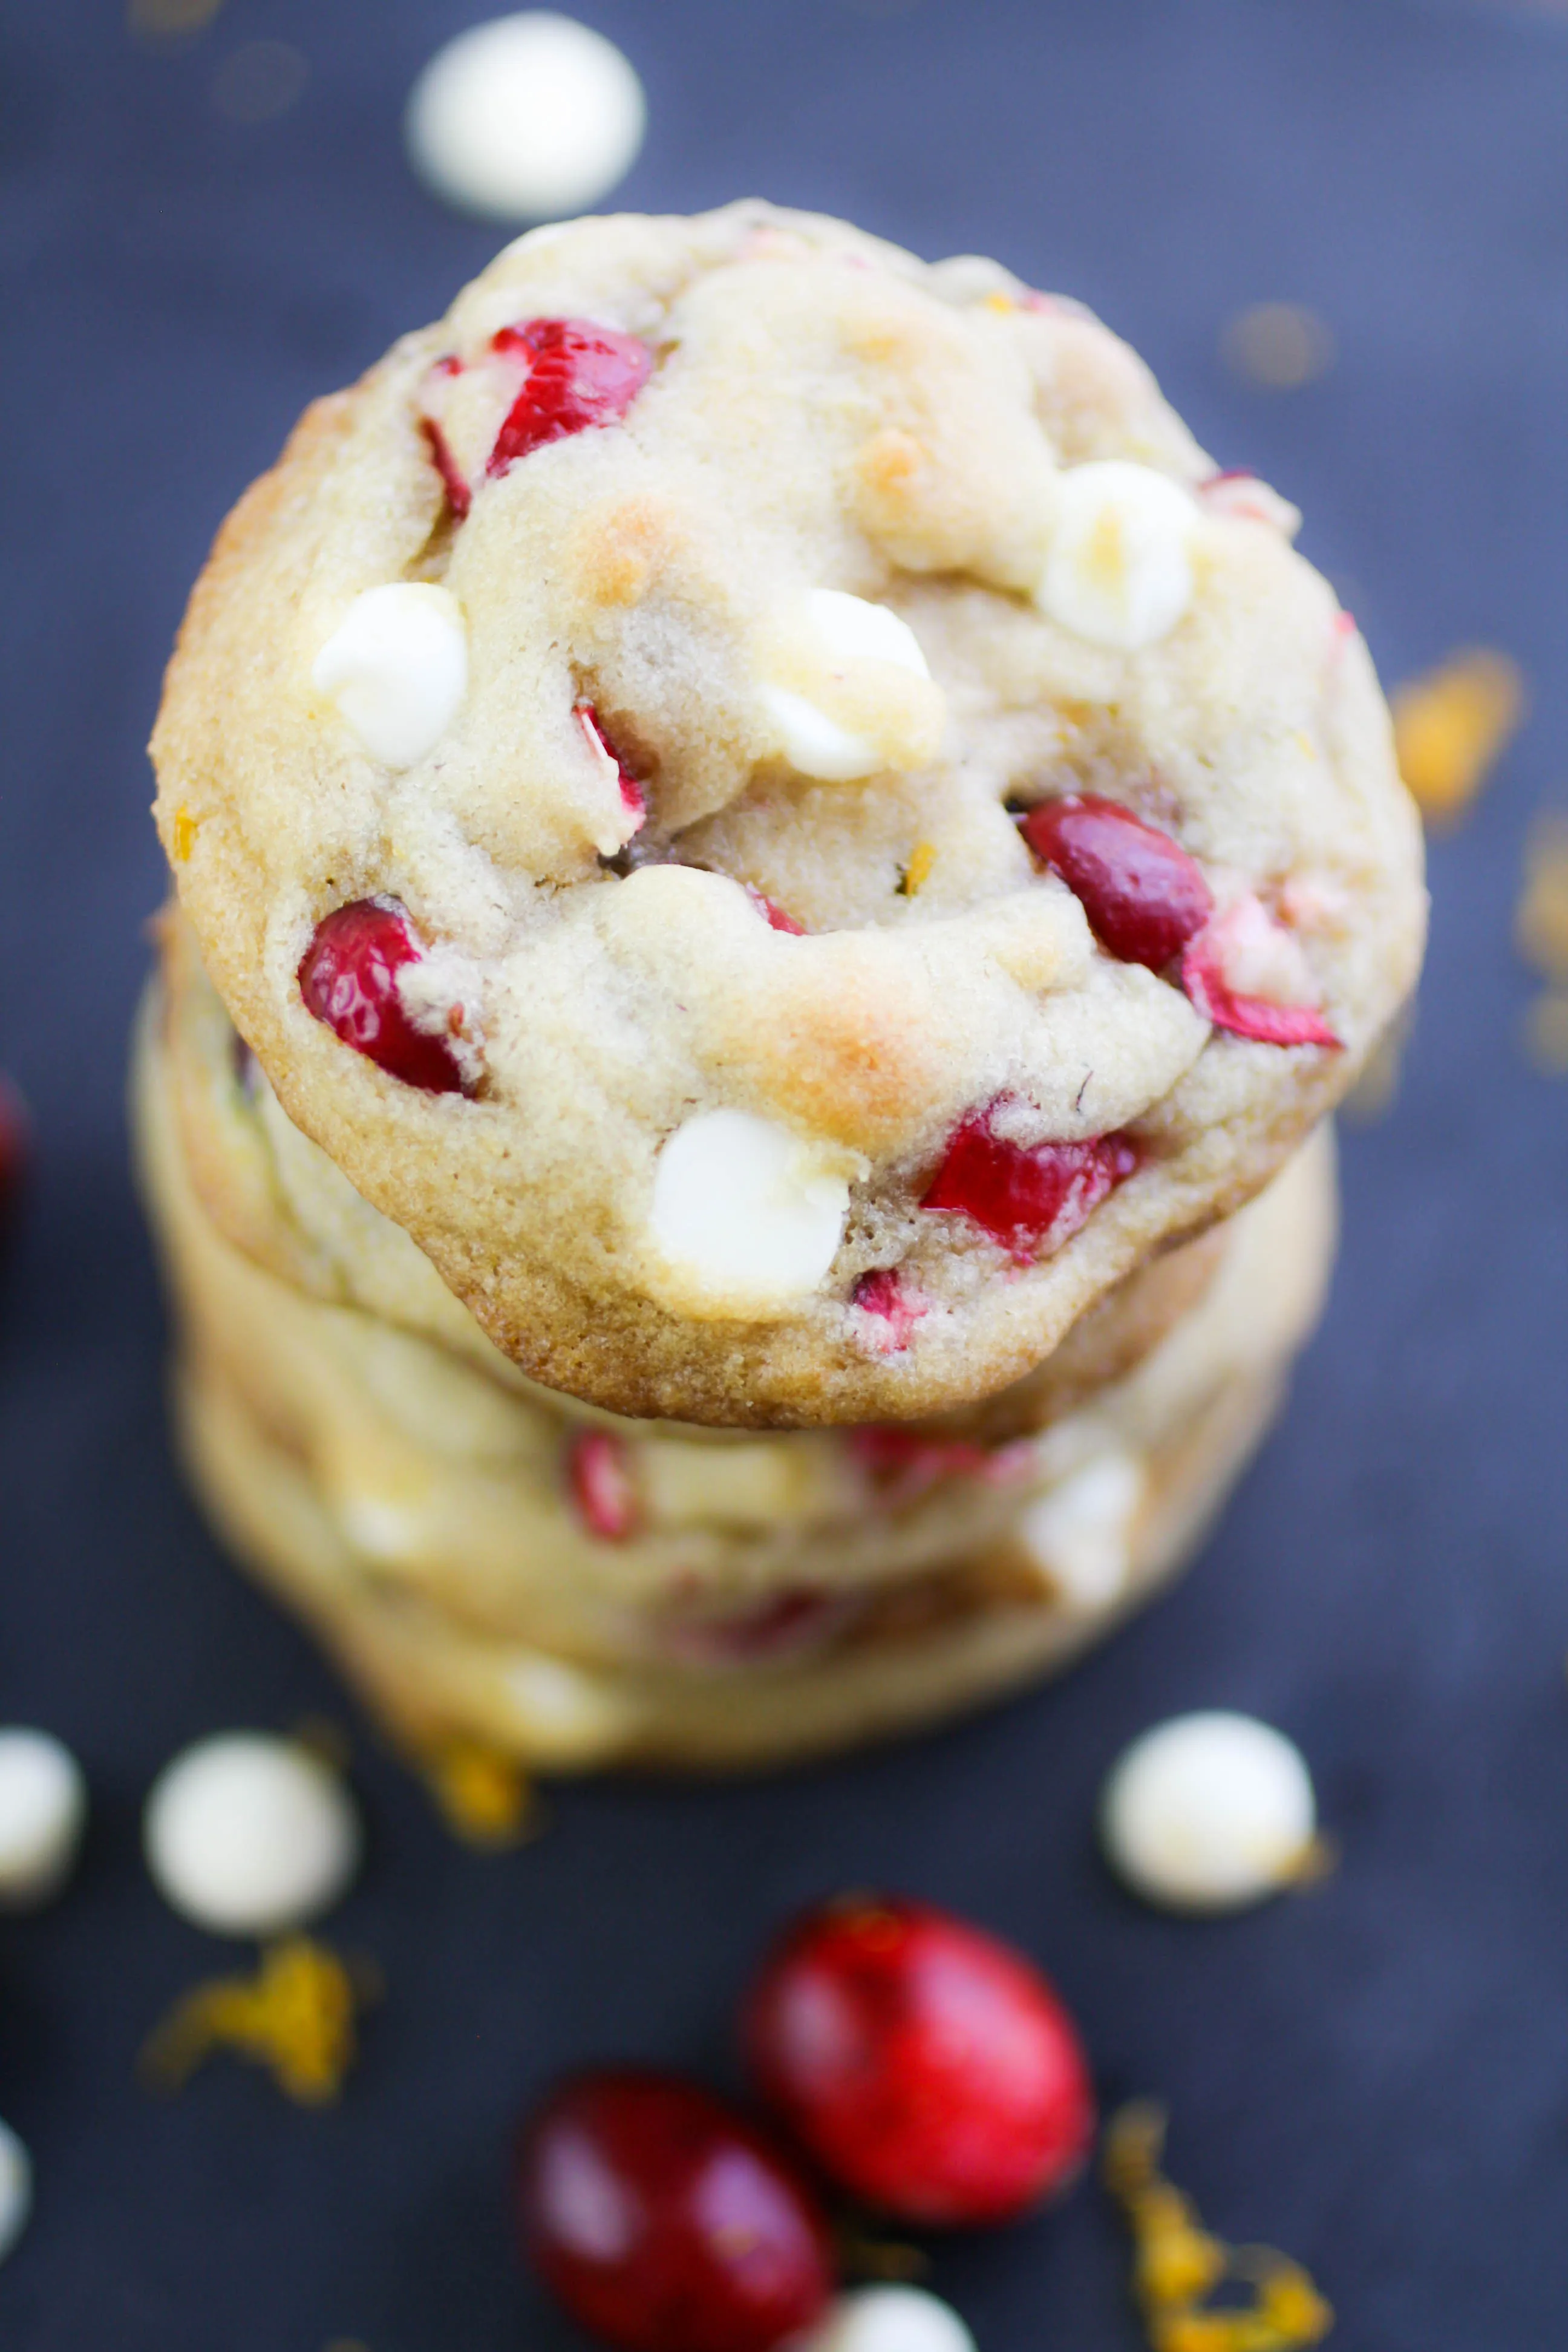 Cranberry-Orange White Chocolate Chip Cookies are a seasonal treat. Make a batch of Cranberry-Orange White Chocolate Chip Cookies today!